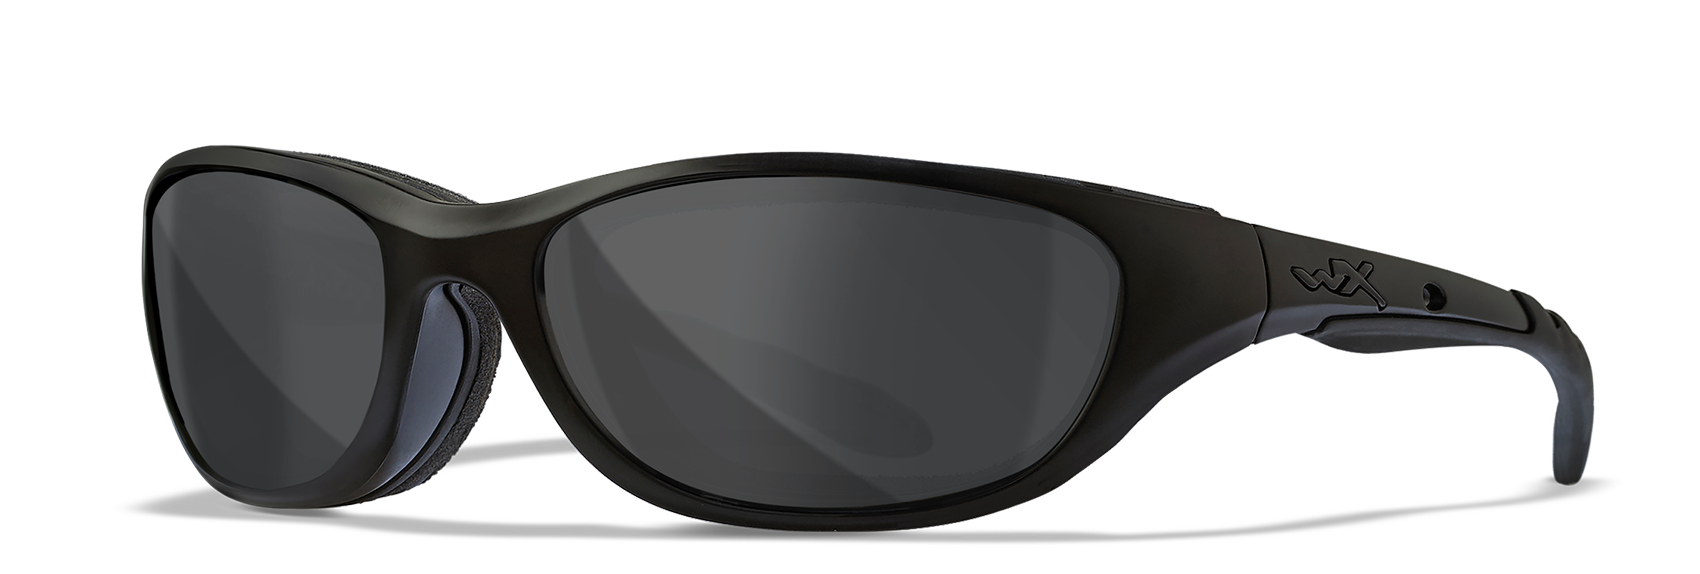 Wiley X AIRRAGE Oval Sunglasses  Matte Black 61-18-124